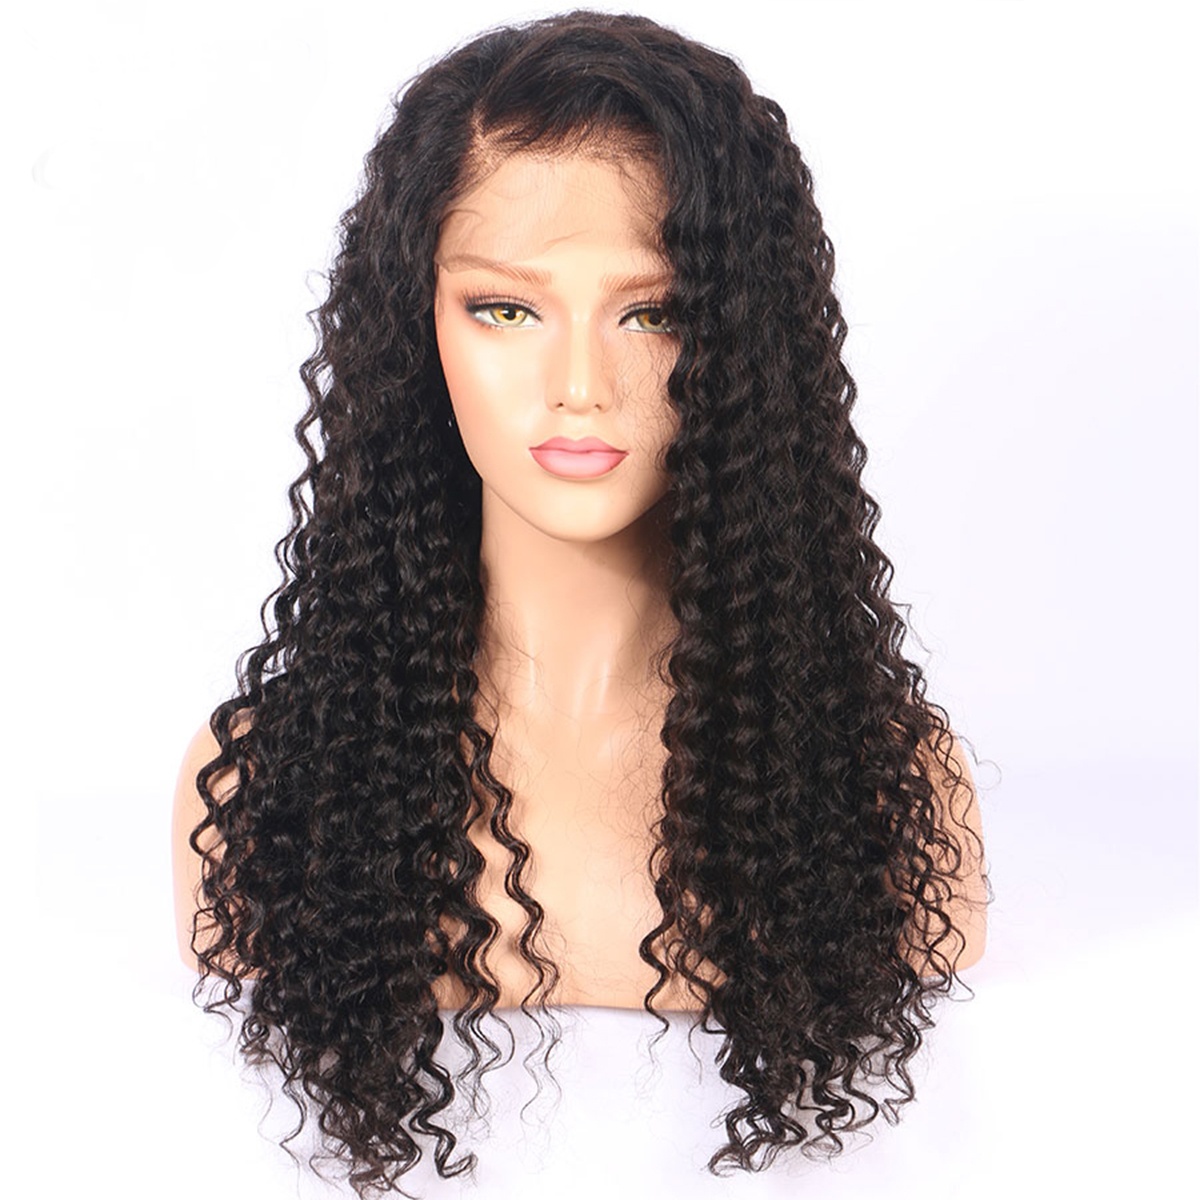 ISABEL 130% Density Curly Human Hair Wigs For African Women Glueless Curly Lace Front Human Hair Wigs